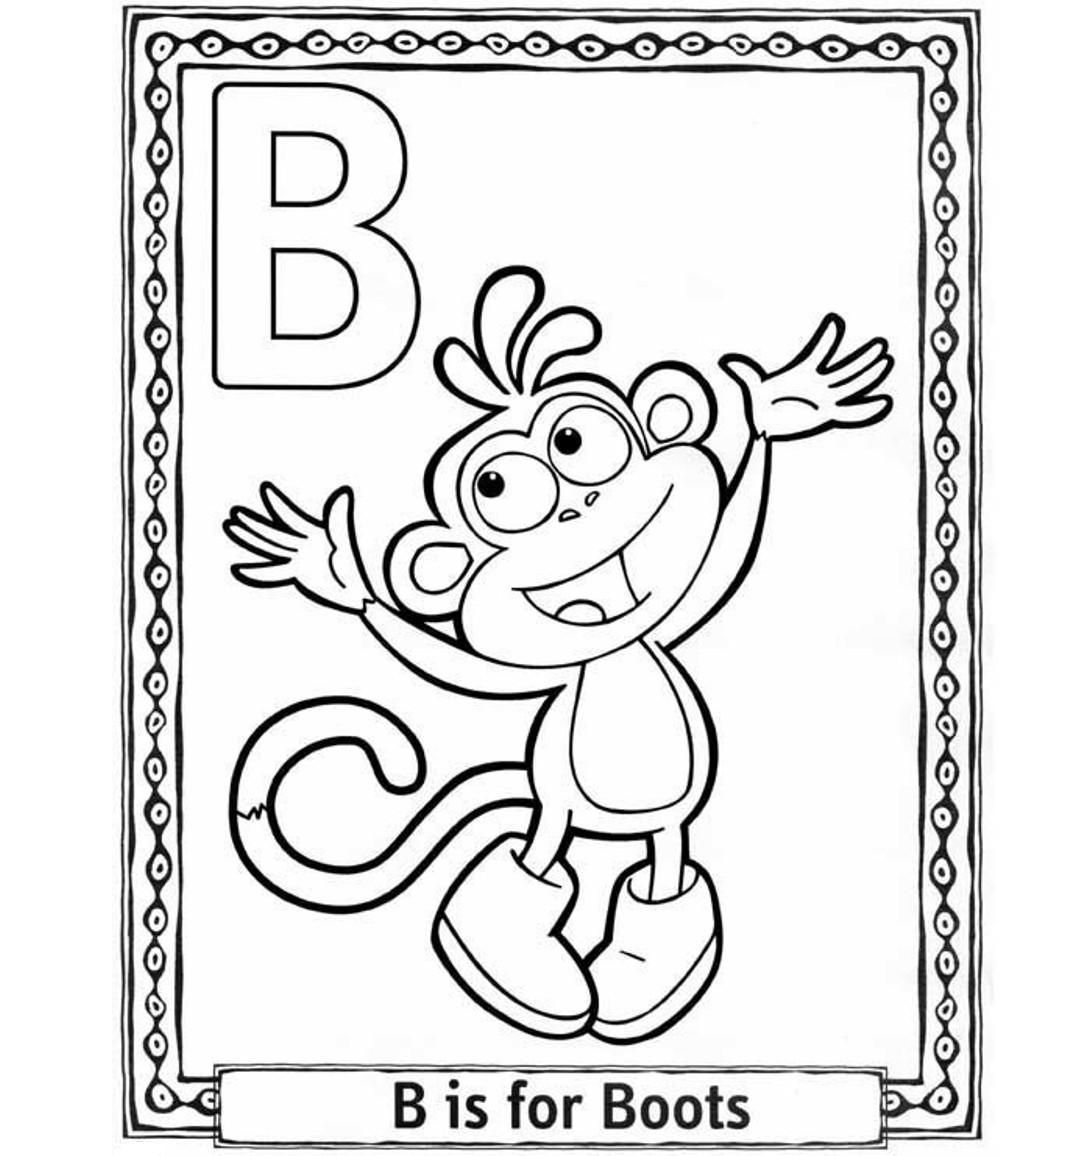 Alphabet Coloring Pages B For Boots | Alphabet Coloring pages of ...